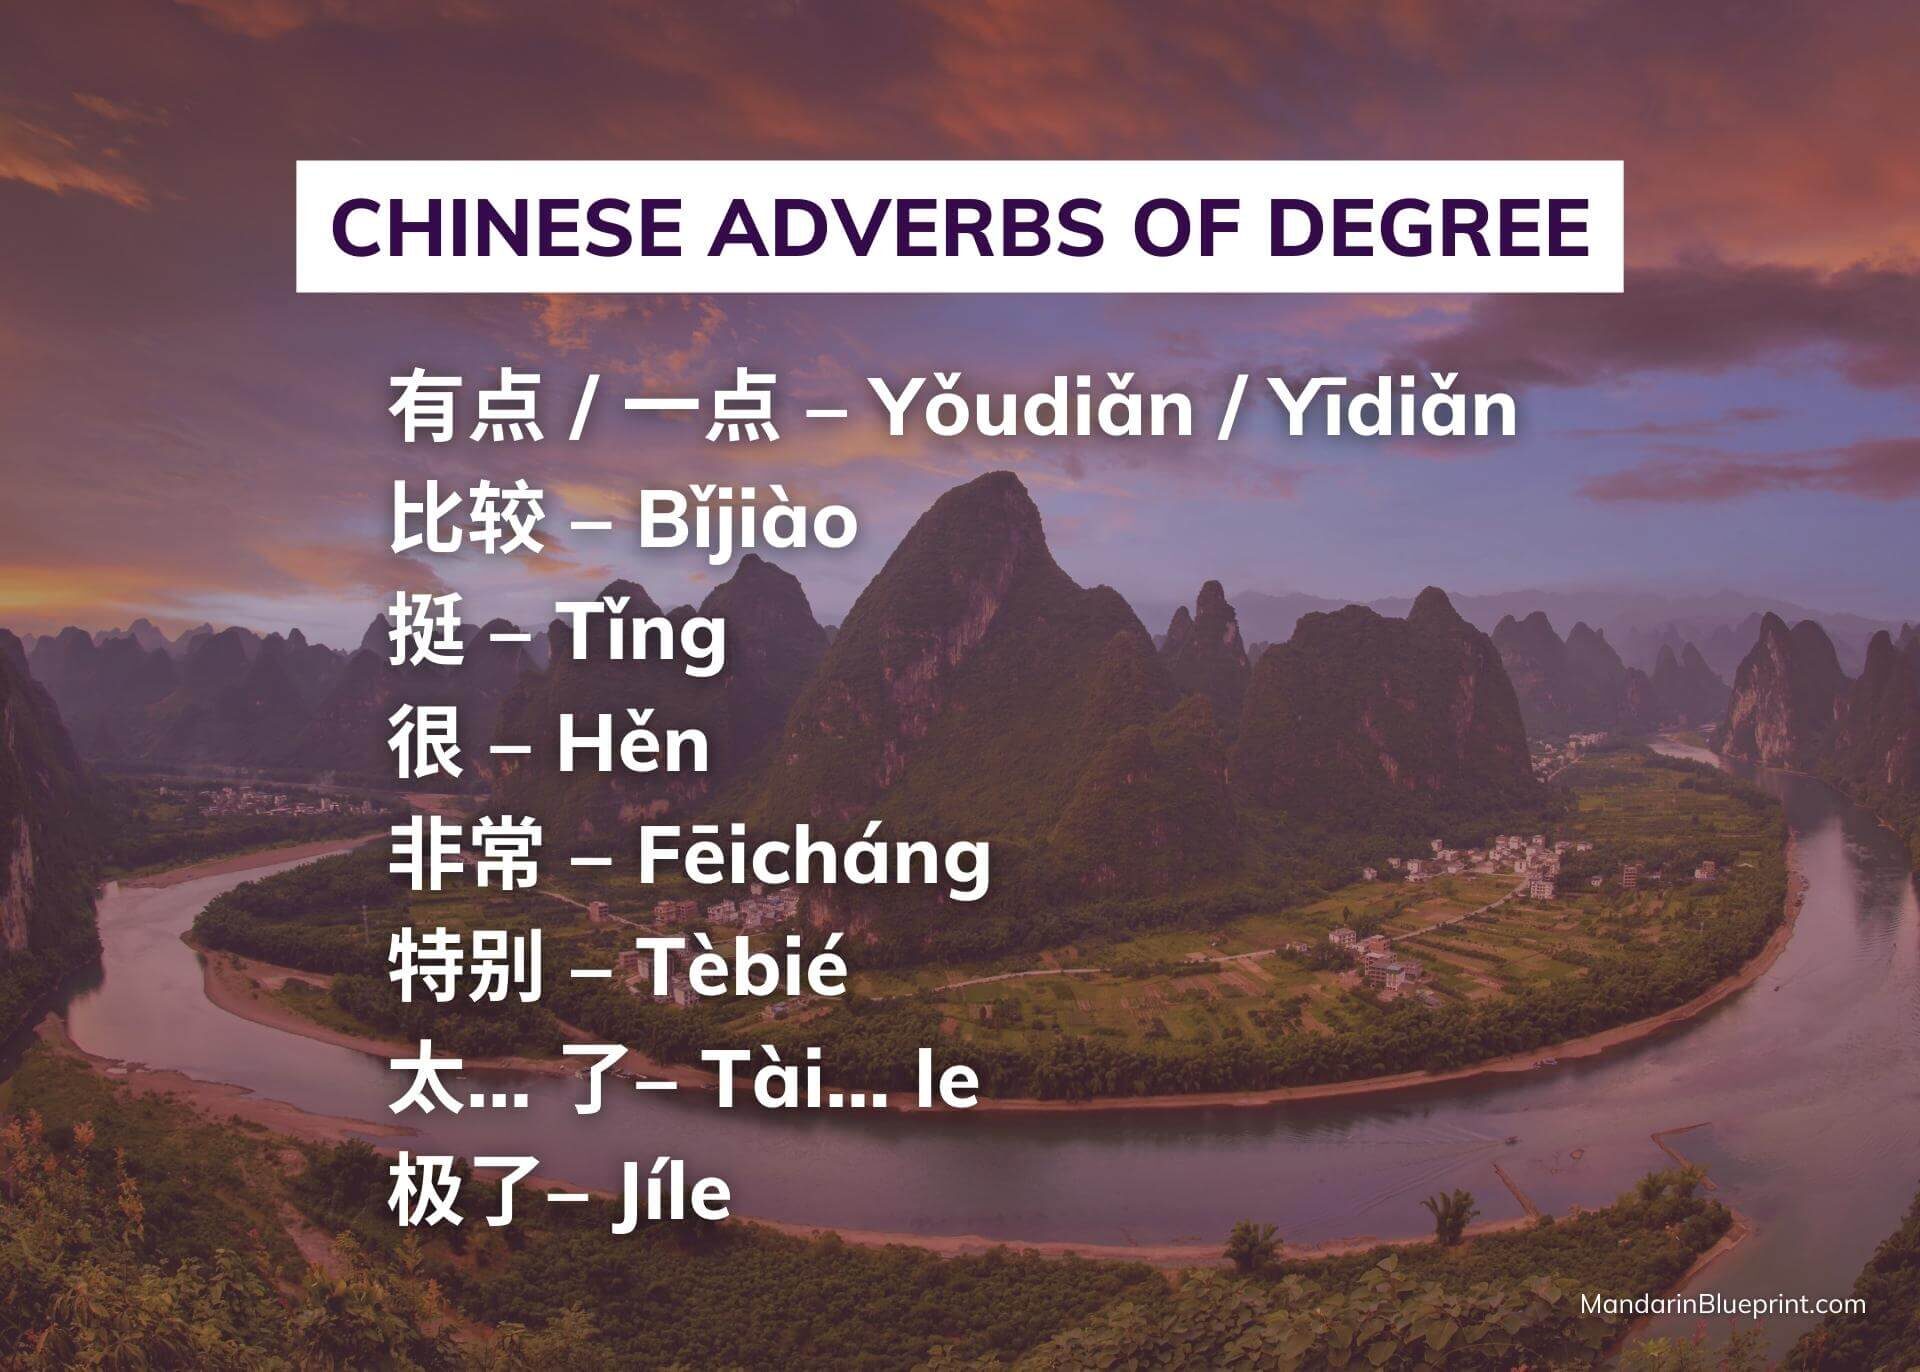 Chinese adverbs of degree